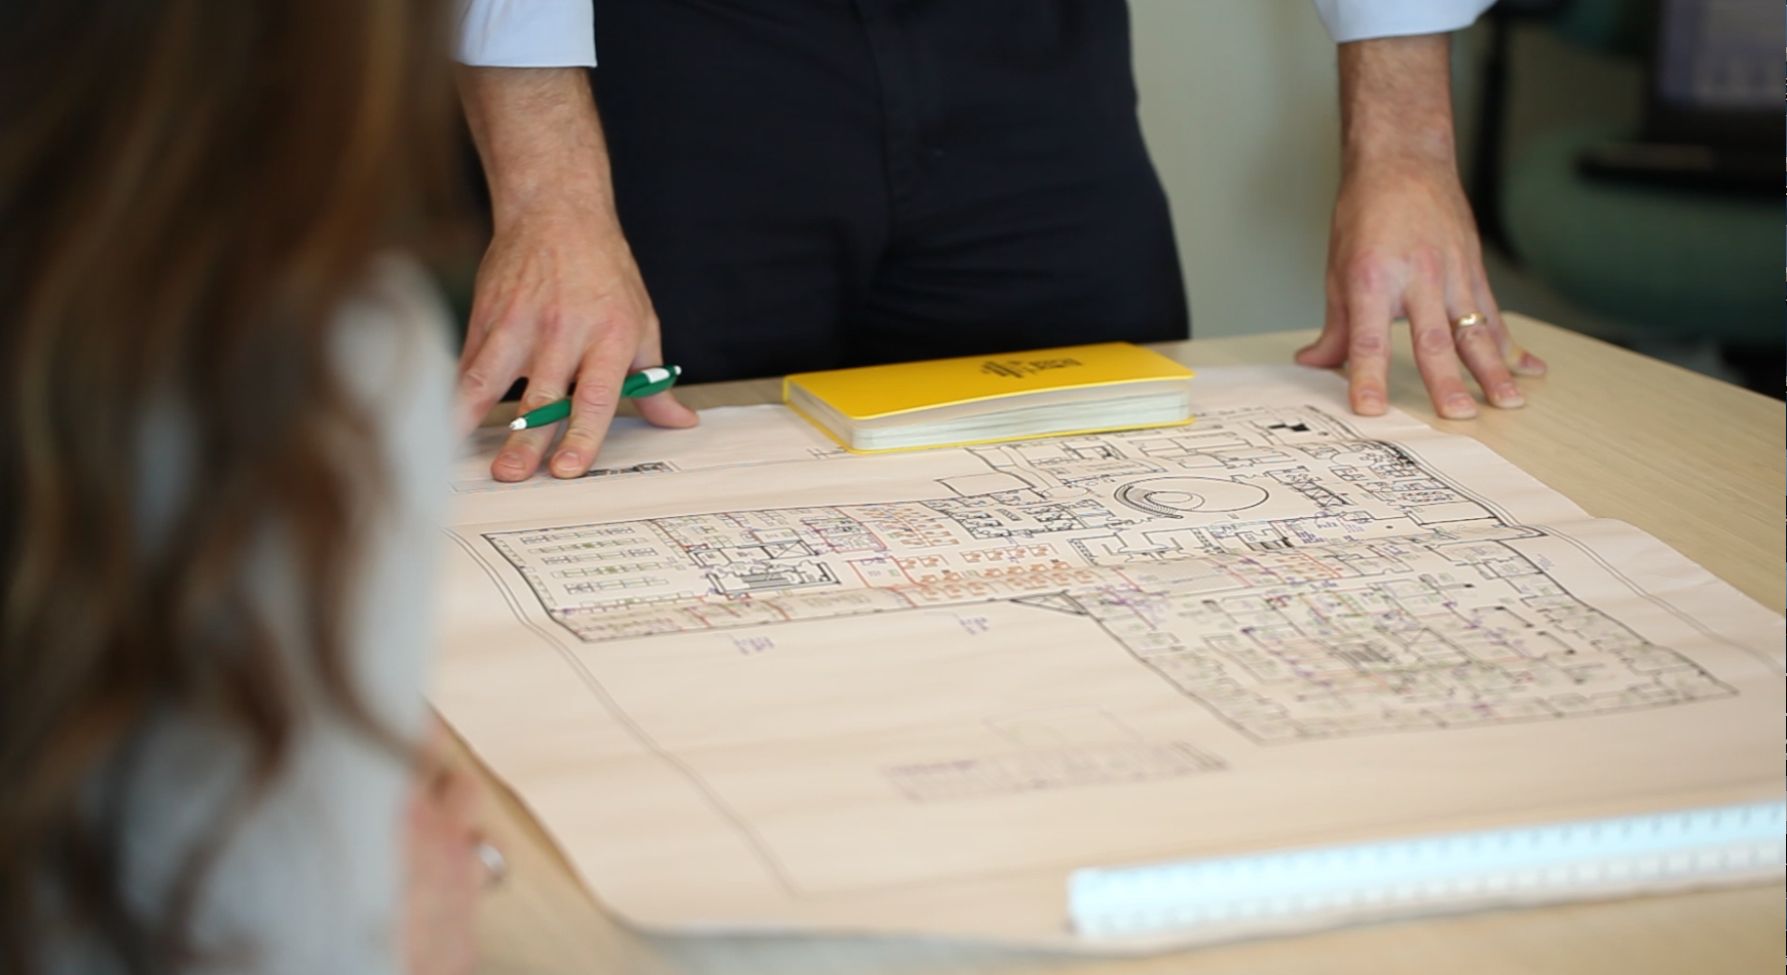 Blueprint of facility being examined on a table